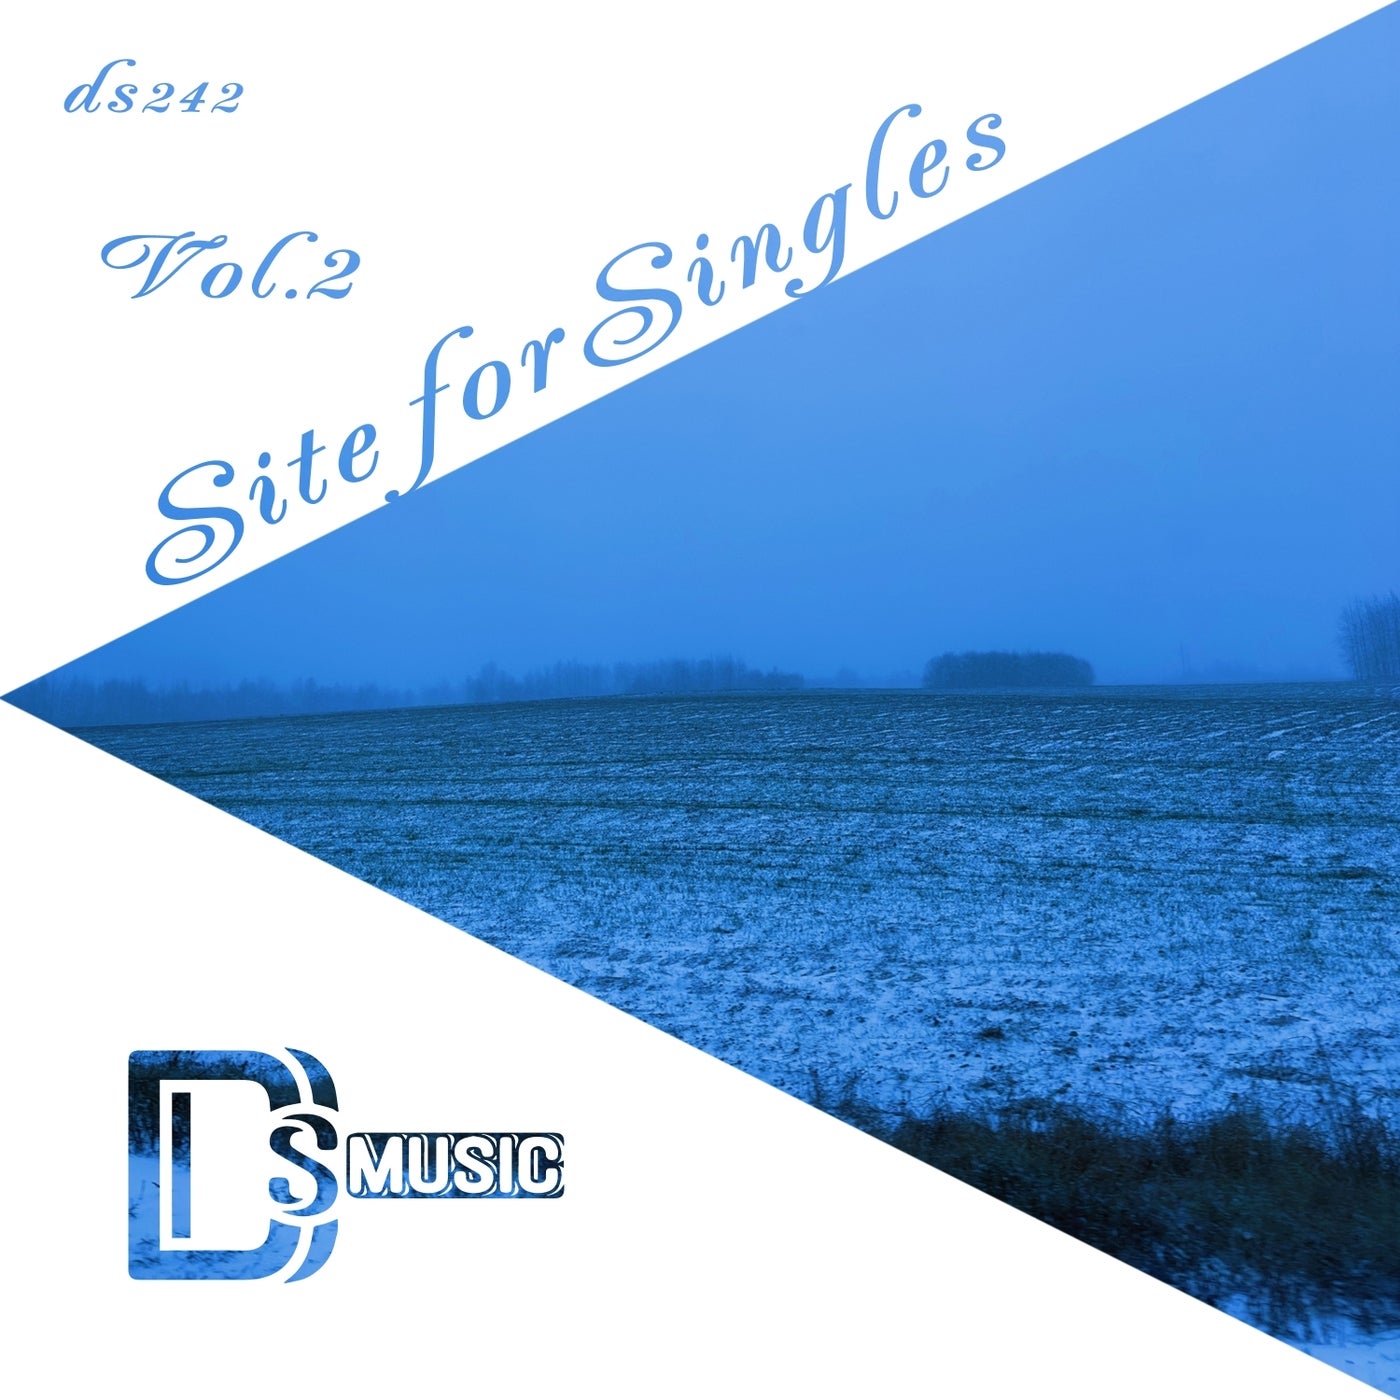 Site for Singles, Vol. 2